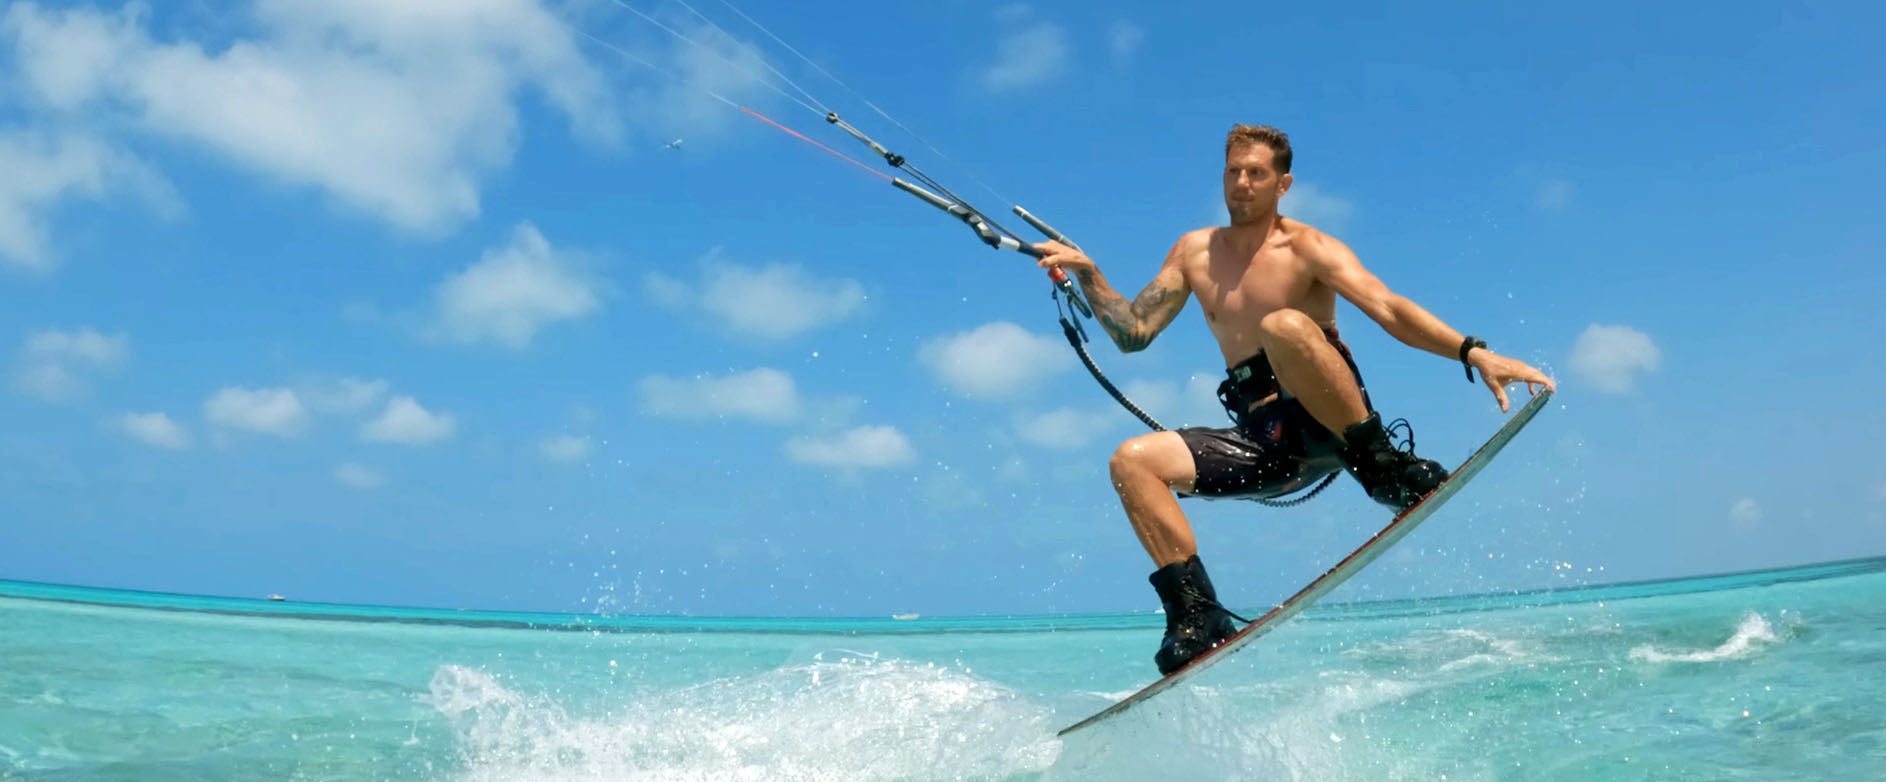 When is the best time to visit Florida for kitesurfing.jpg__PID:d4e16d9d-91c4-4bab-b70e-cb614b8898d4